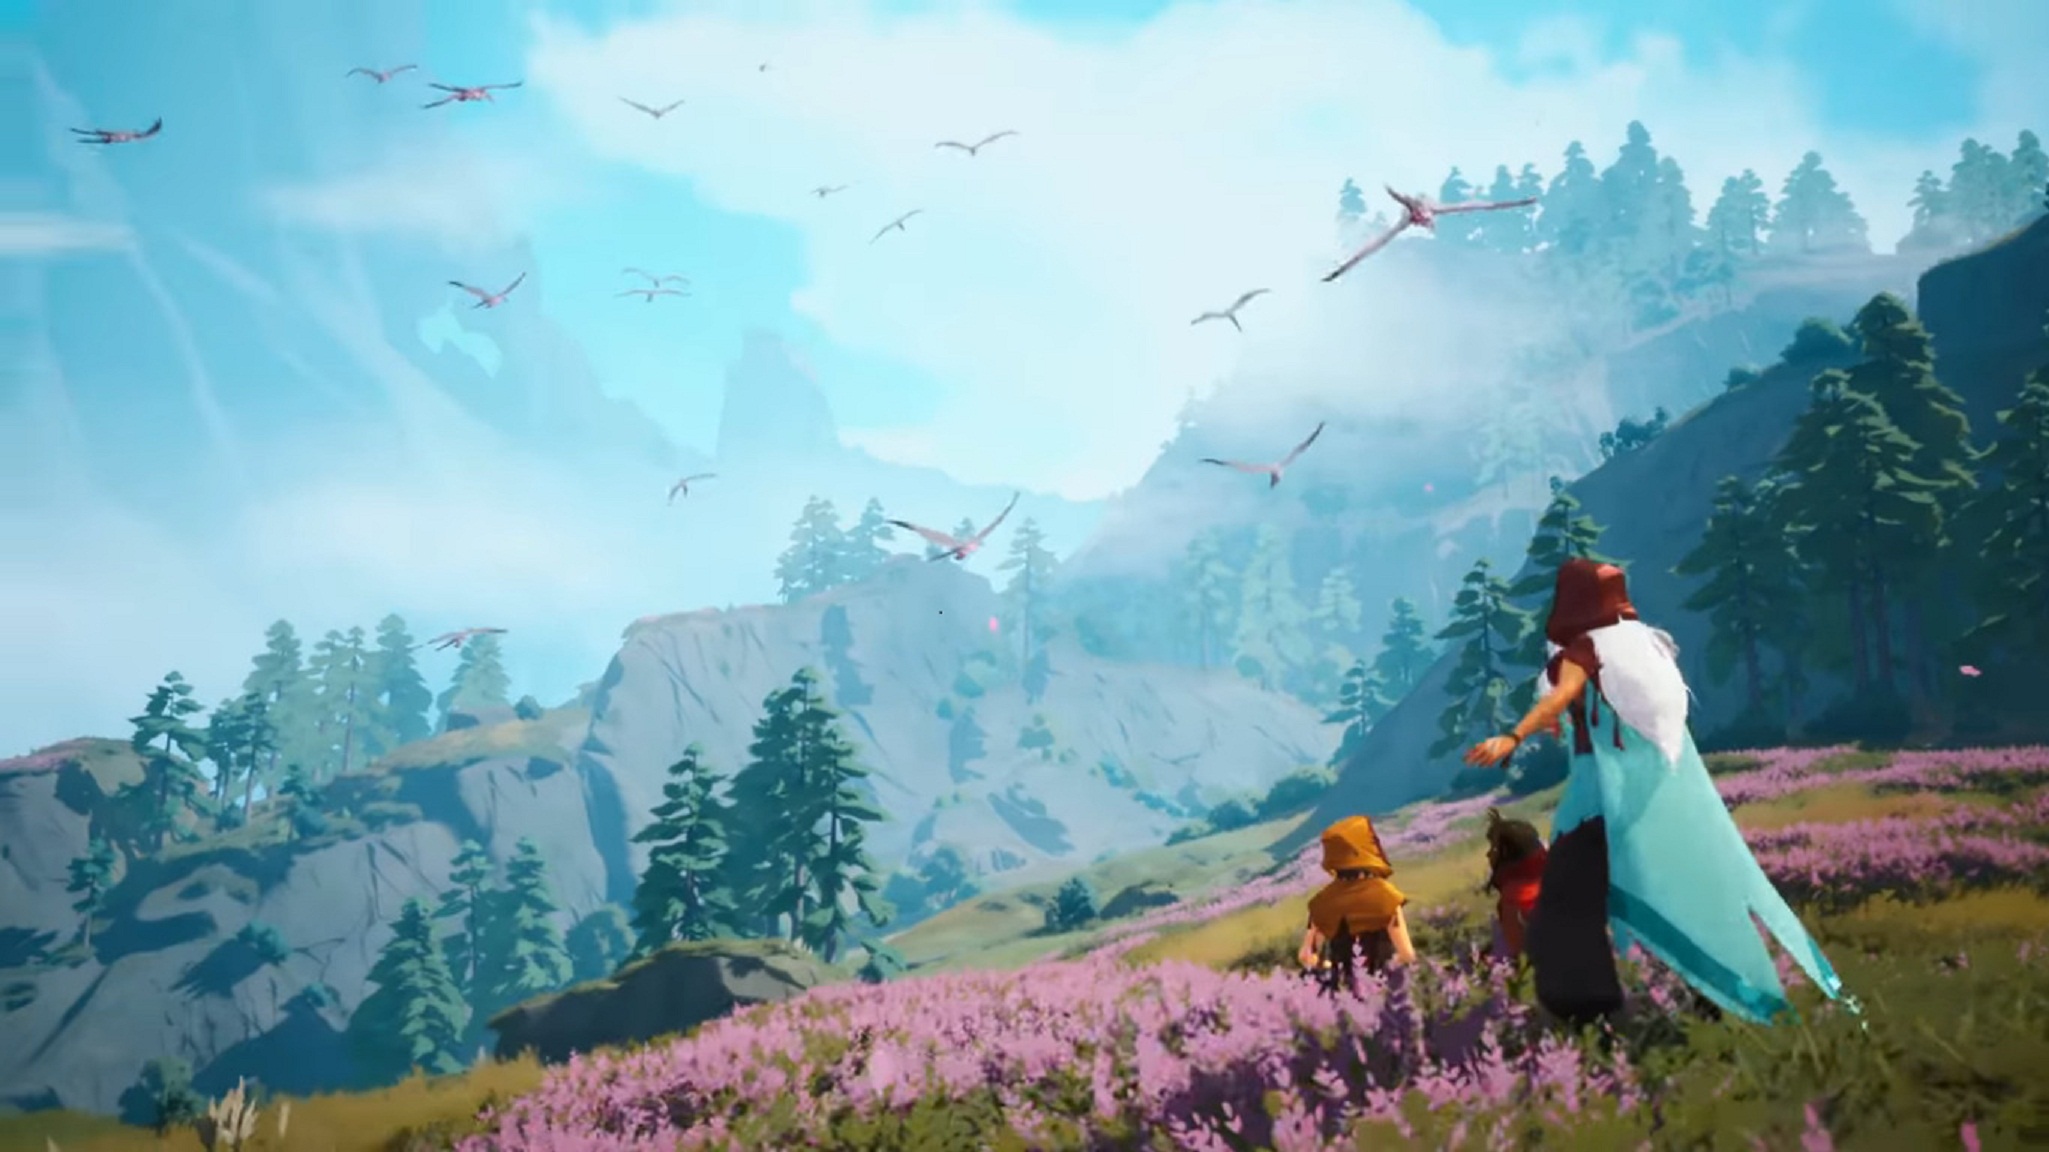 Microsoft’s Child Company; Rare, Has Announced A ‘Brand New’ IP, Everwild Set In A ‘Natural And Magical World’